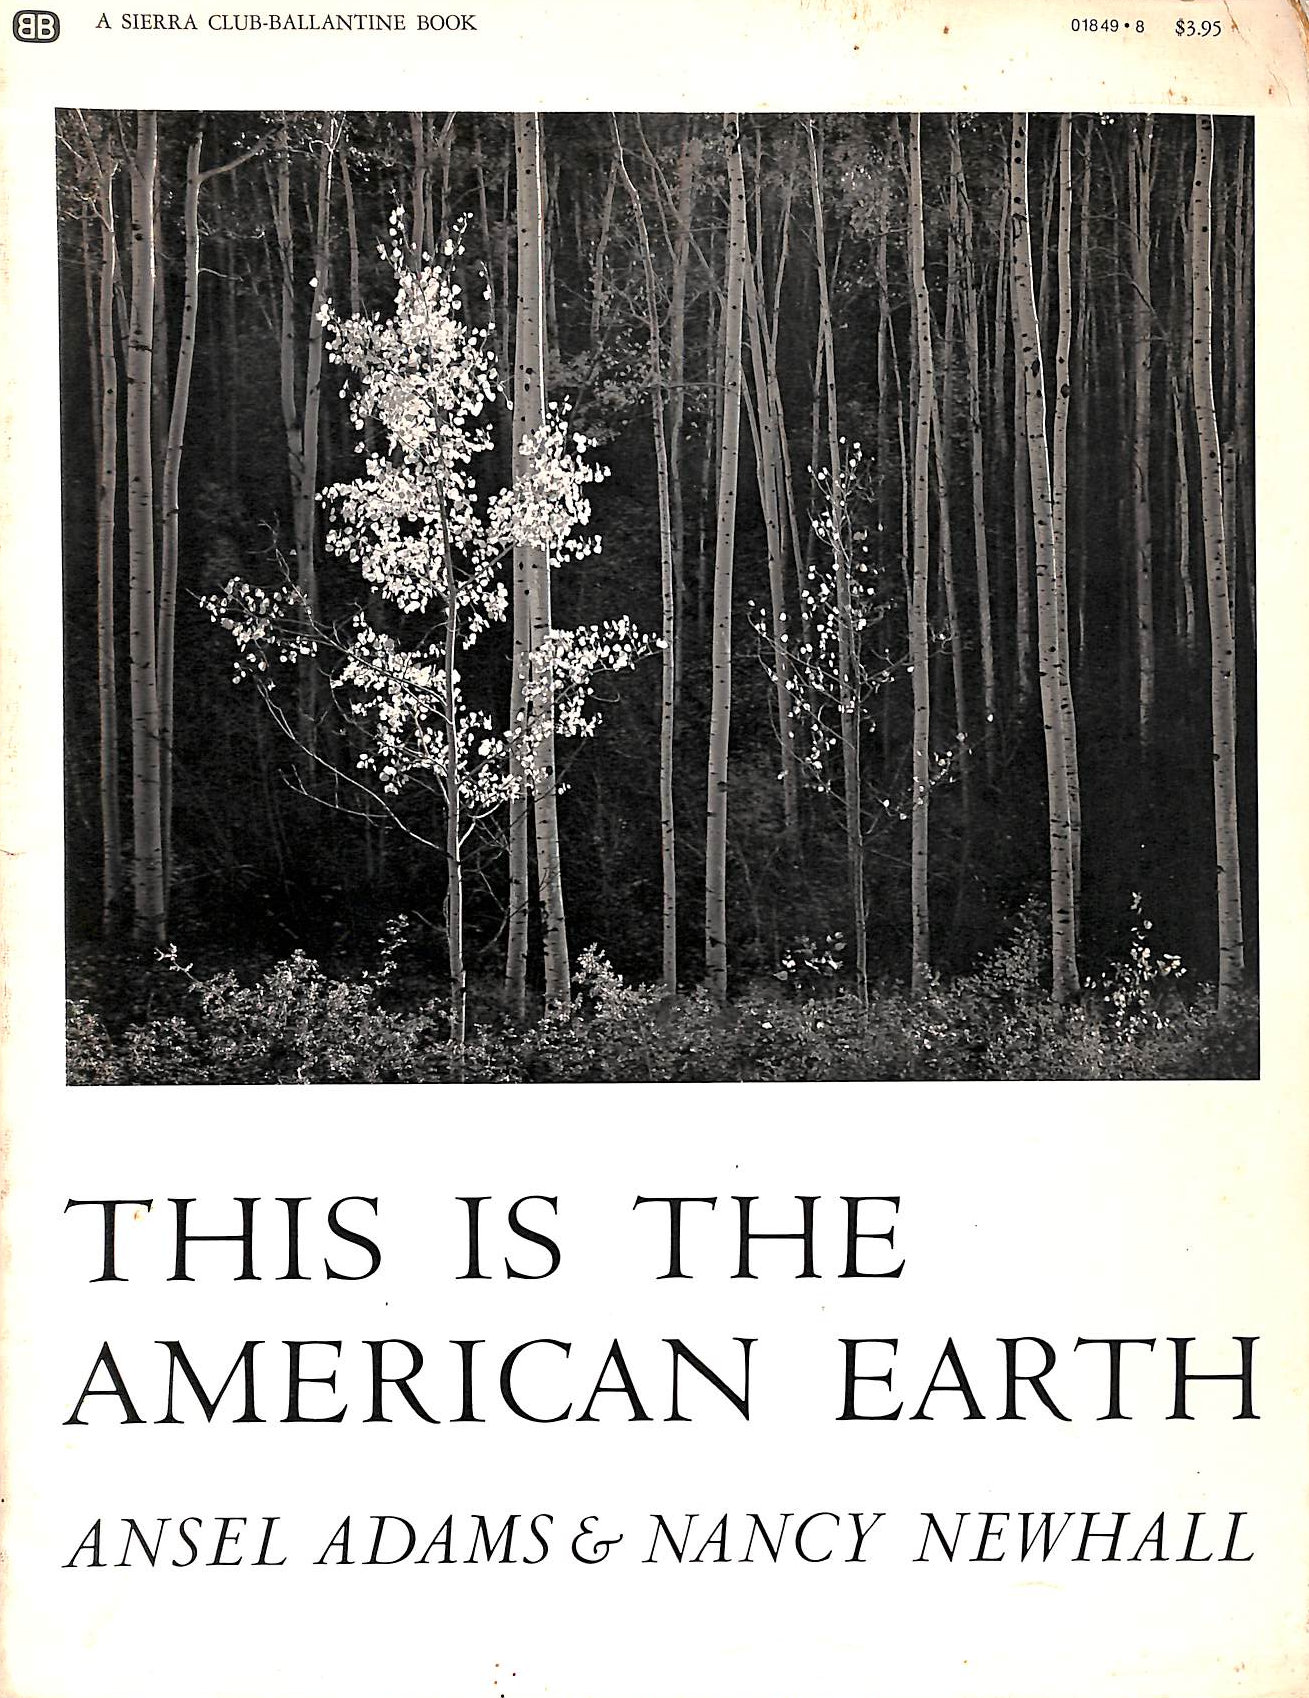 ANSEL ADAMS; NANCY NEWHALL - This is the American Earth